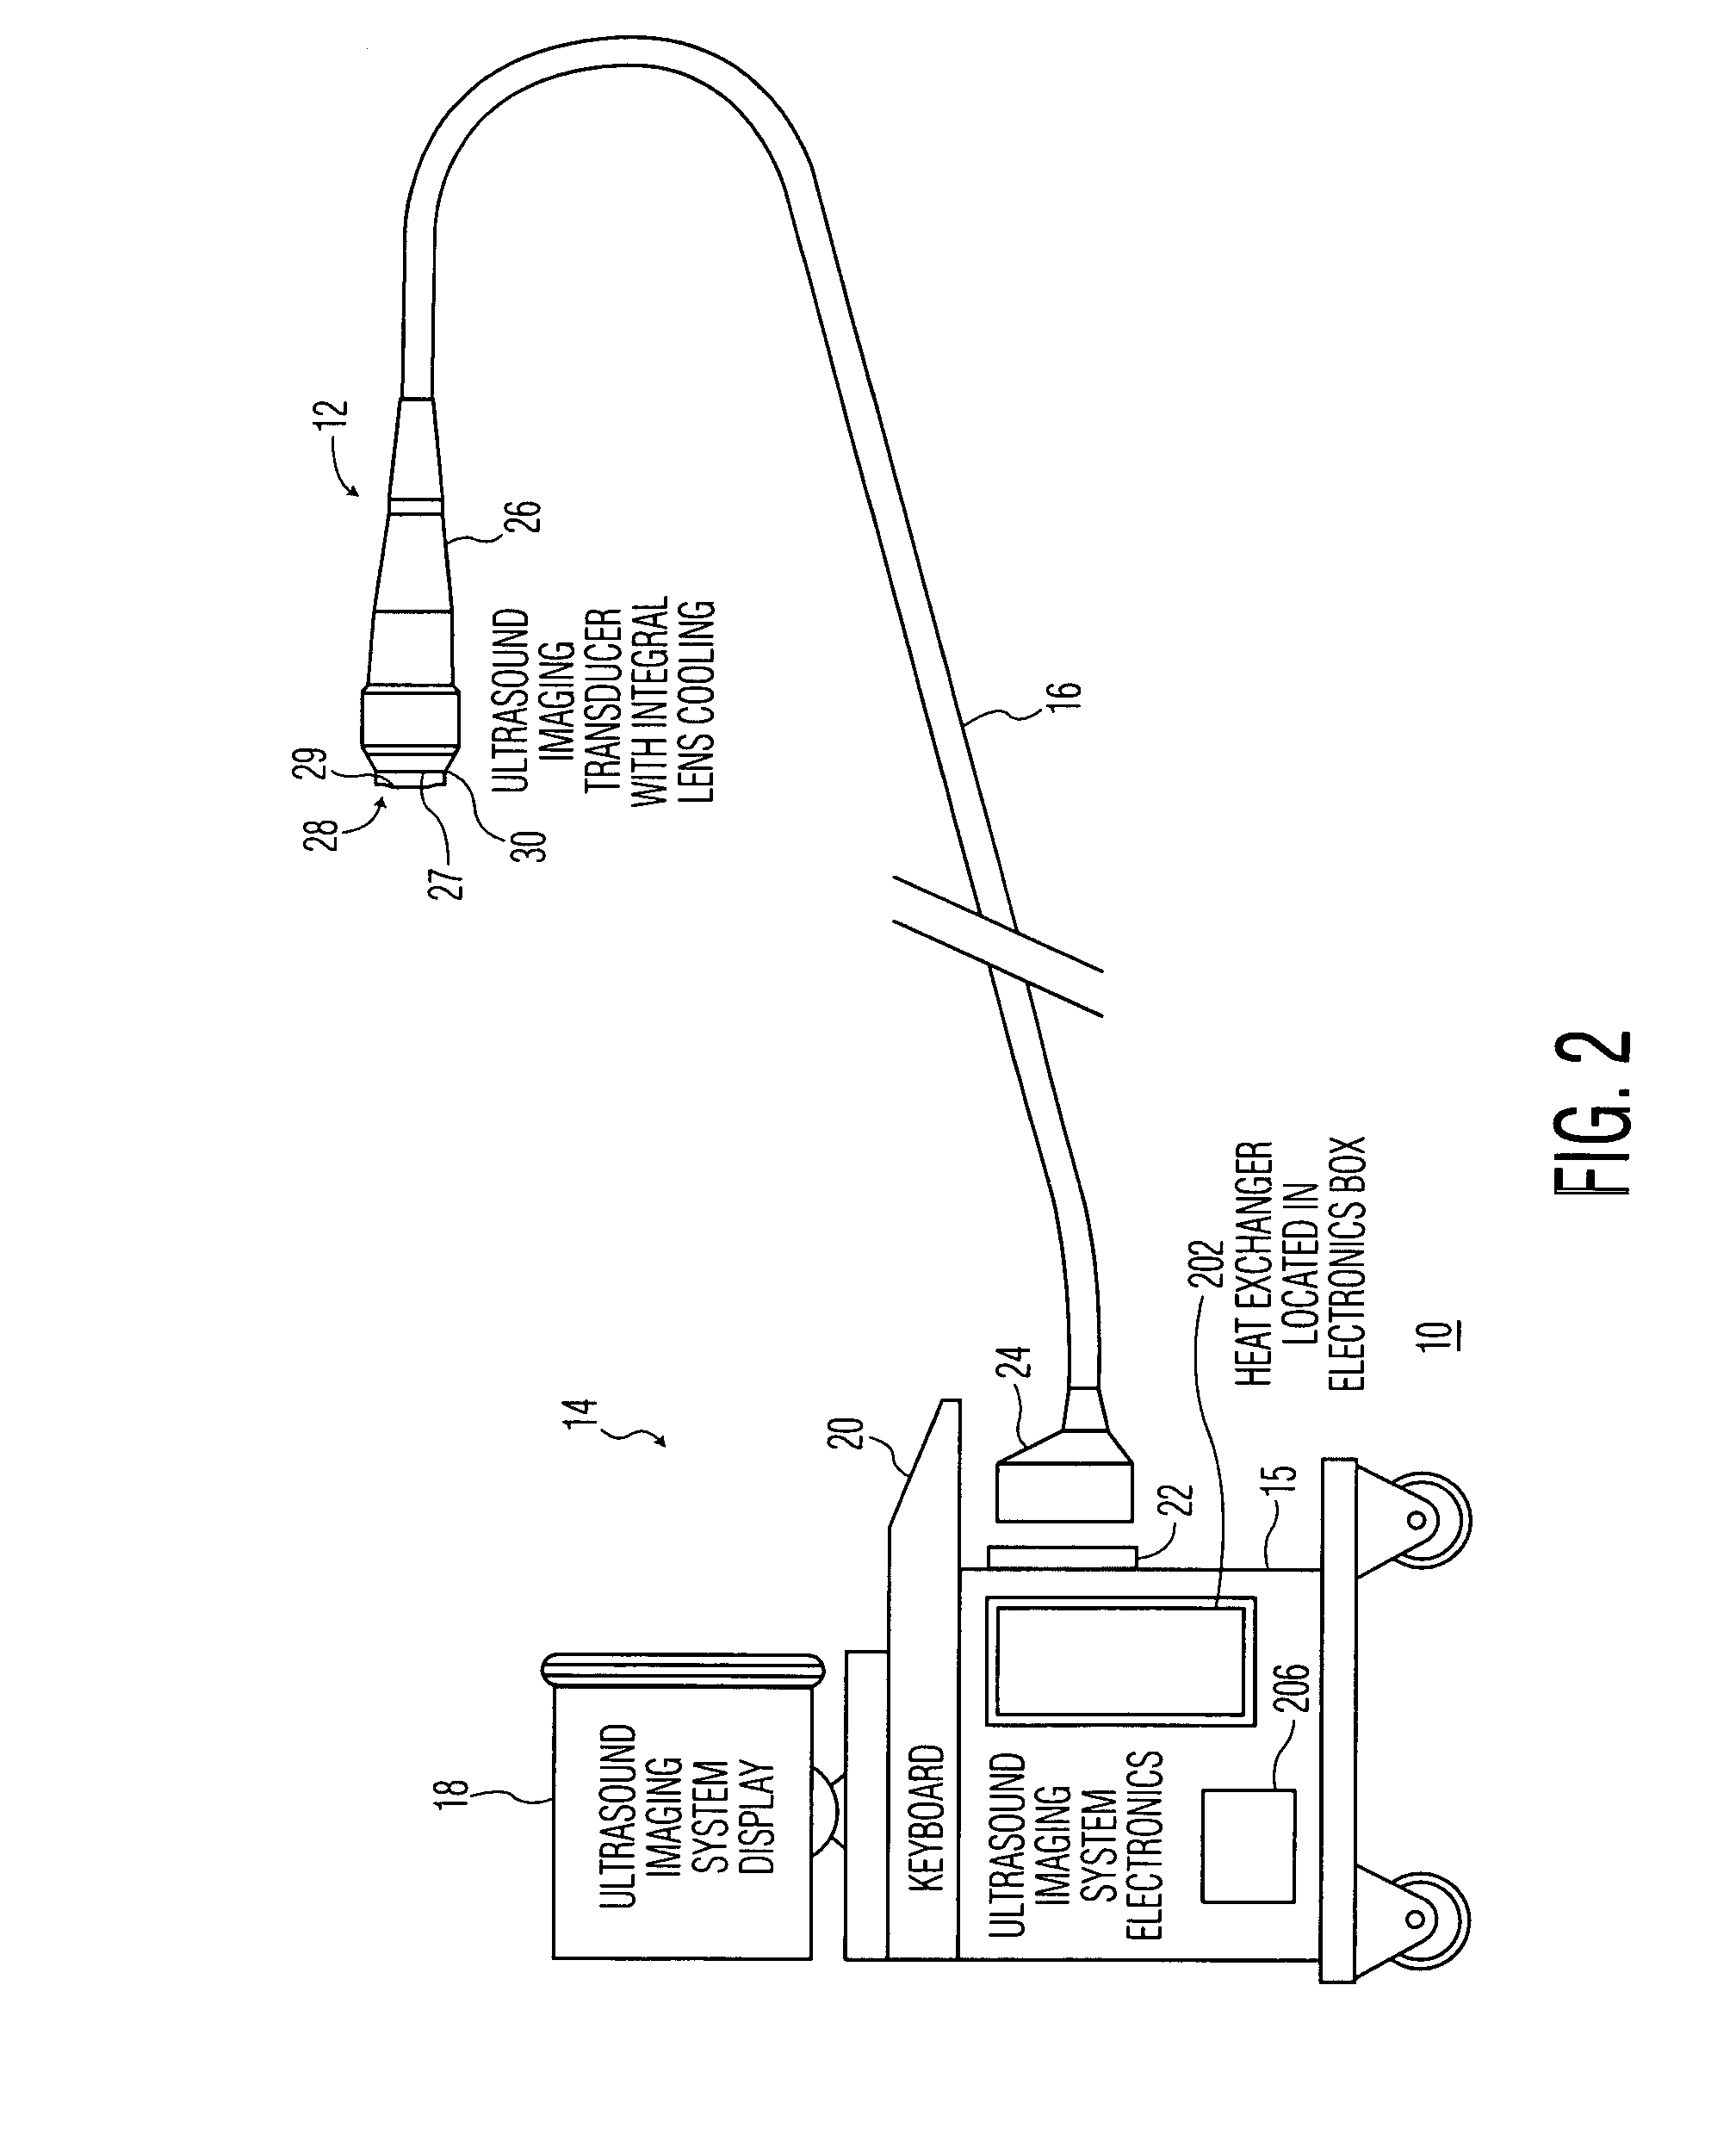 Method and apparatus for cooling a contacting surface of an ultrasound probe